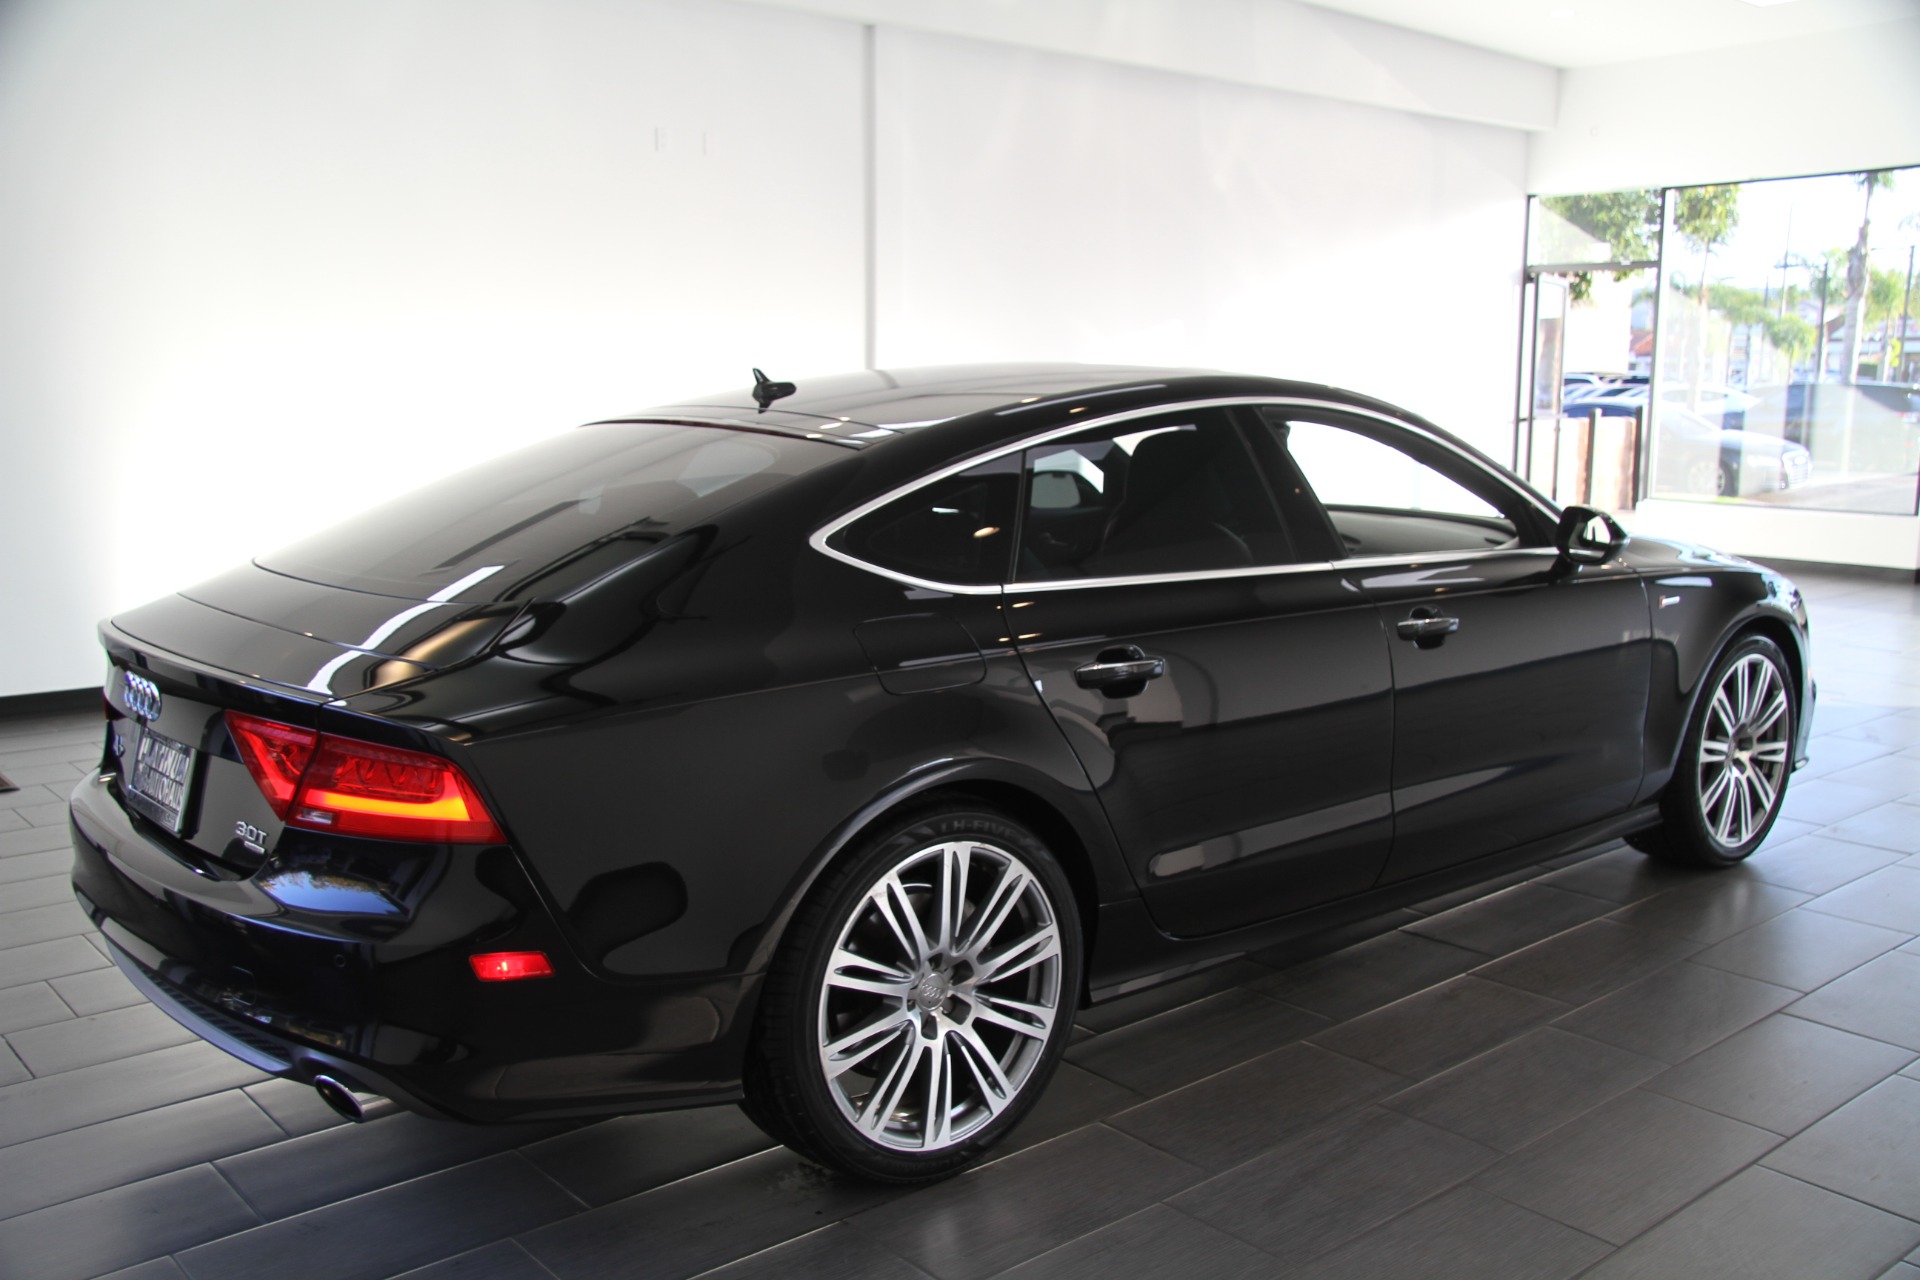 View the exciting audi range and book your test drive, request a brochure, configure your audi or find your nearest audi . 2013 Audi A7 3.0T quattro Prestige S-Line Stock # 6106 for